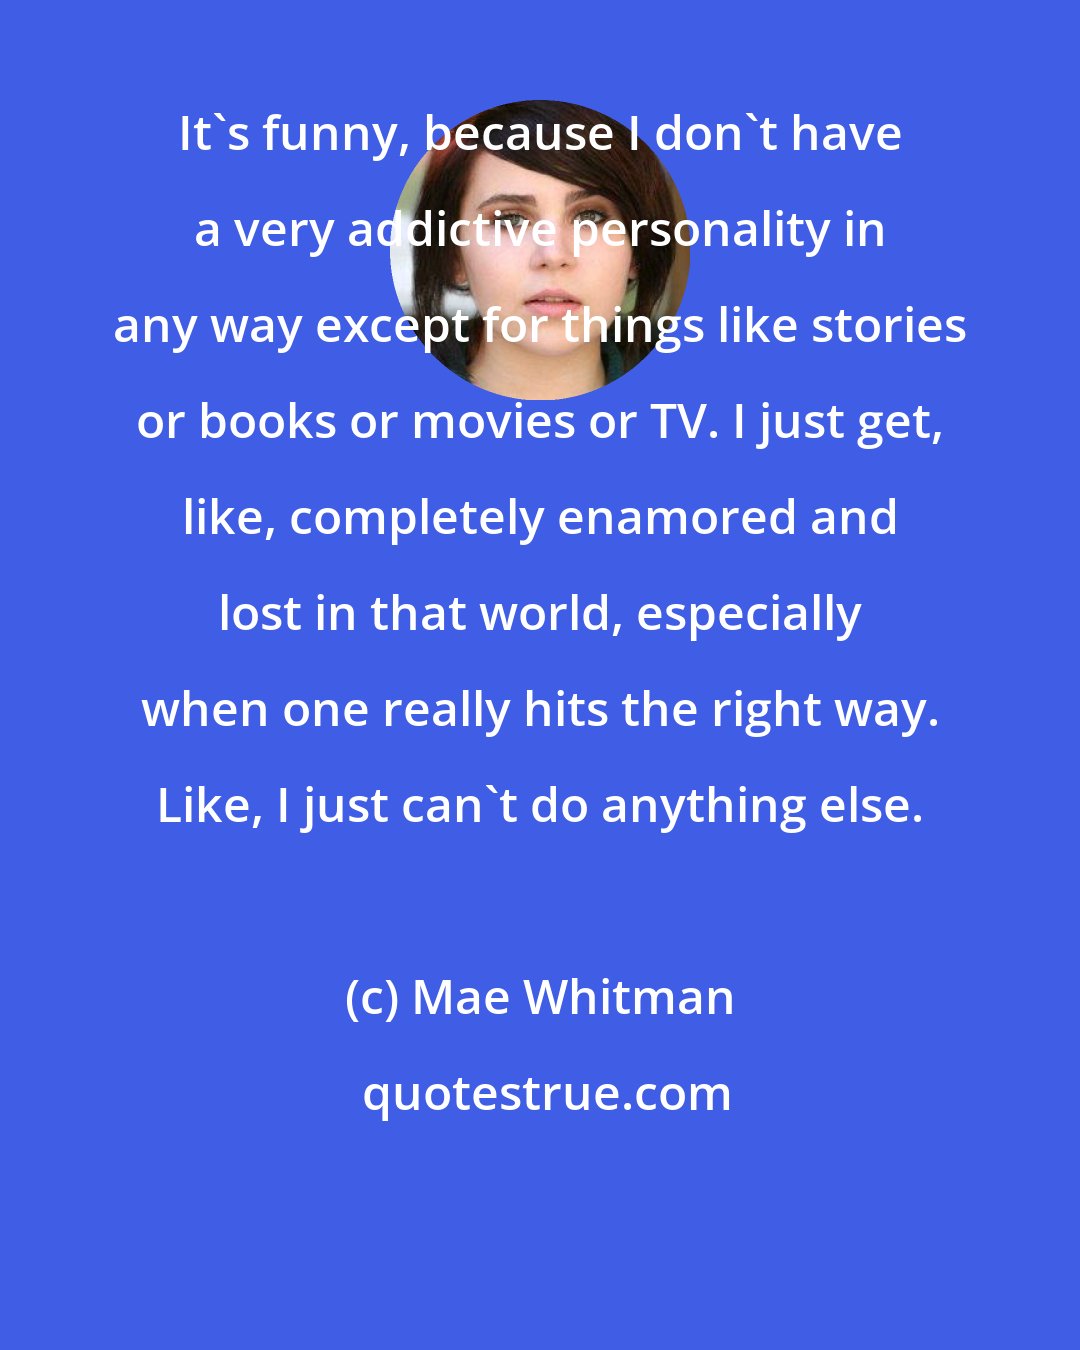 Mae Whitman: It's funny, because I don't have a very addictive personality in any way except for things like stories or books or movies or TV. I just get, like, completely enamored and lost in that world, especially when one really hits the right way. Like, I just can't do anything else.